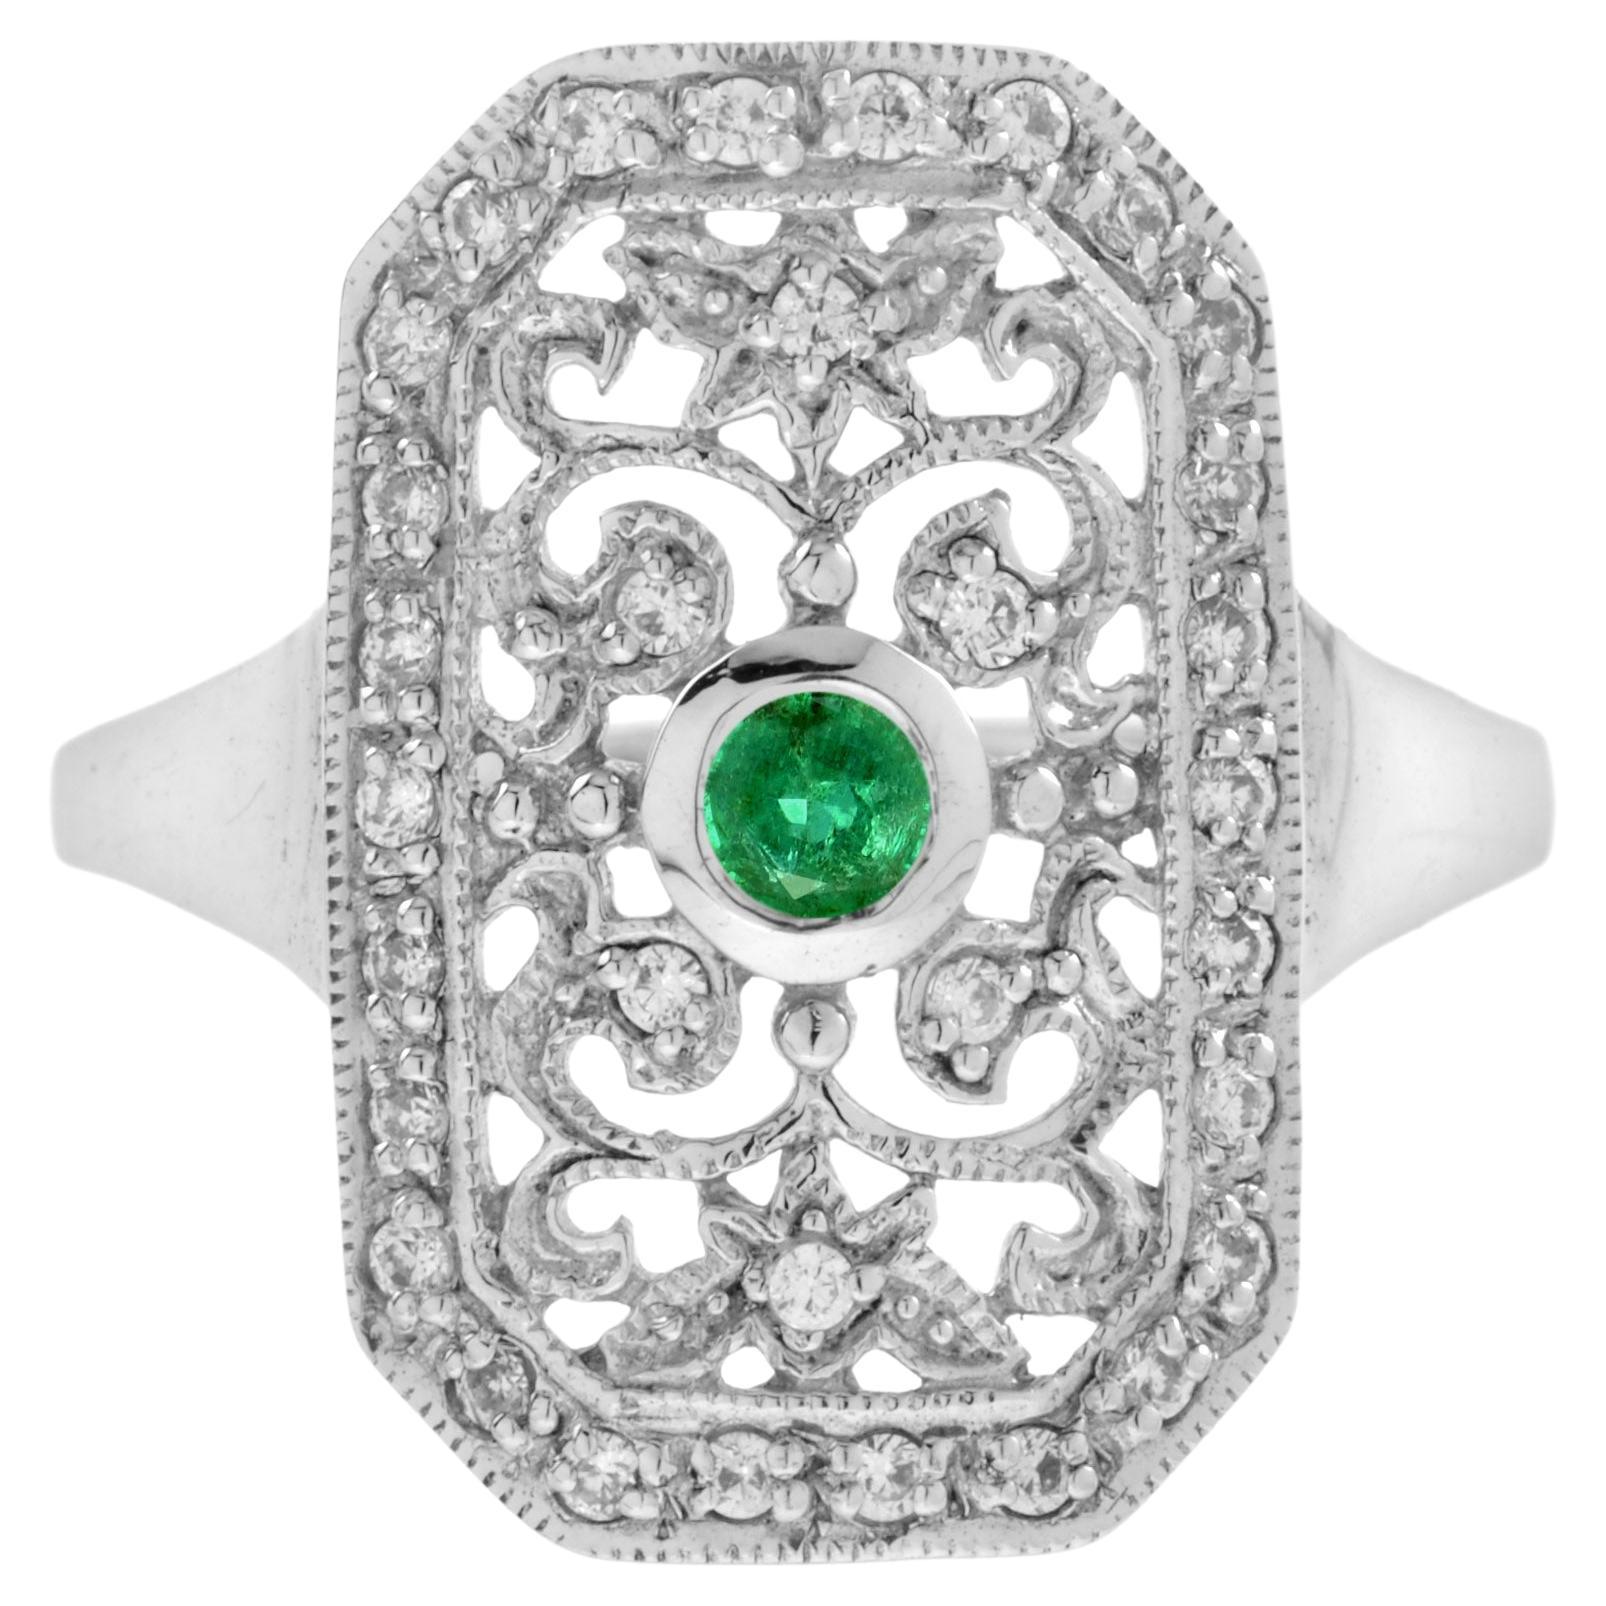 Emerald and Diamond Vintage Style Filigree Ring in 14K White Gold